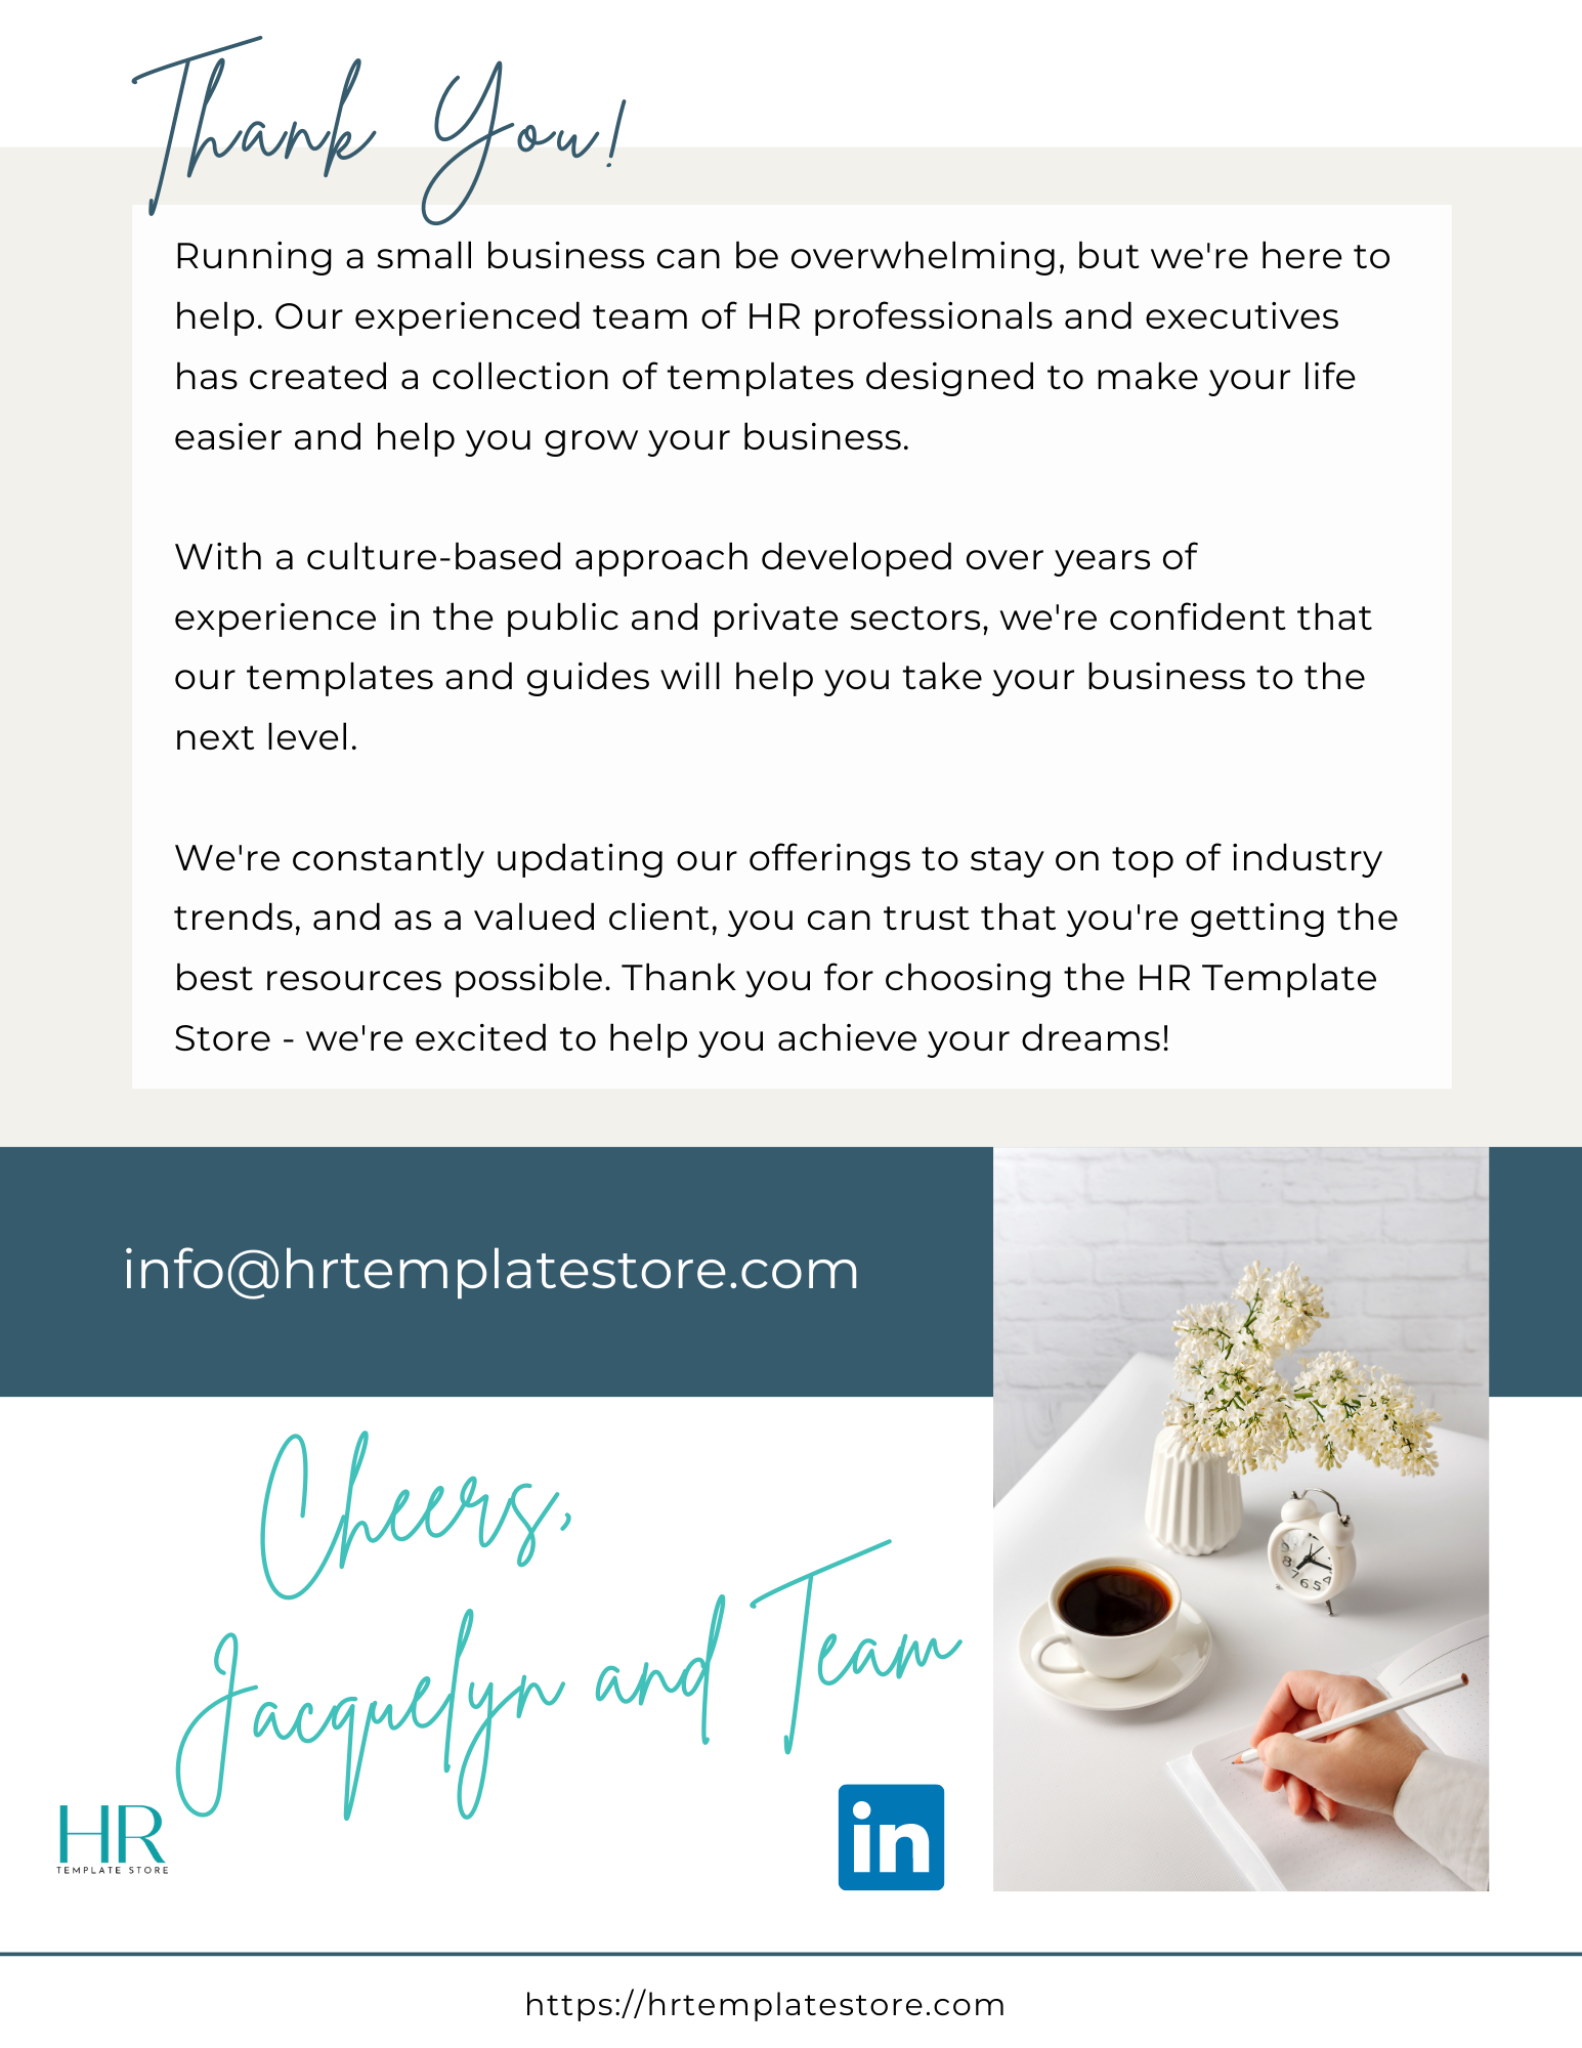 The back page of a Competency Based Interview Questions Templates showcasing the comprehensive HR resources available at HR Template Store.